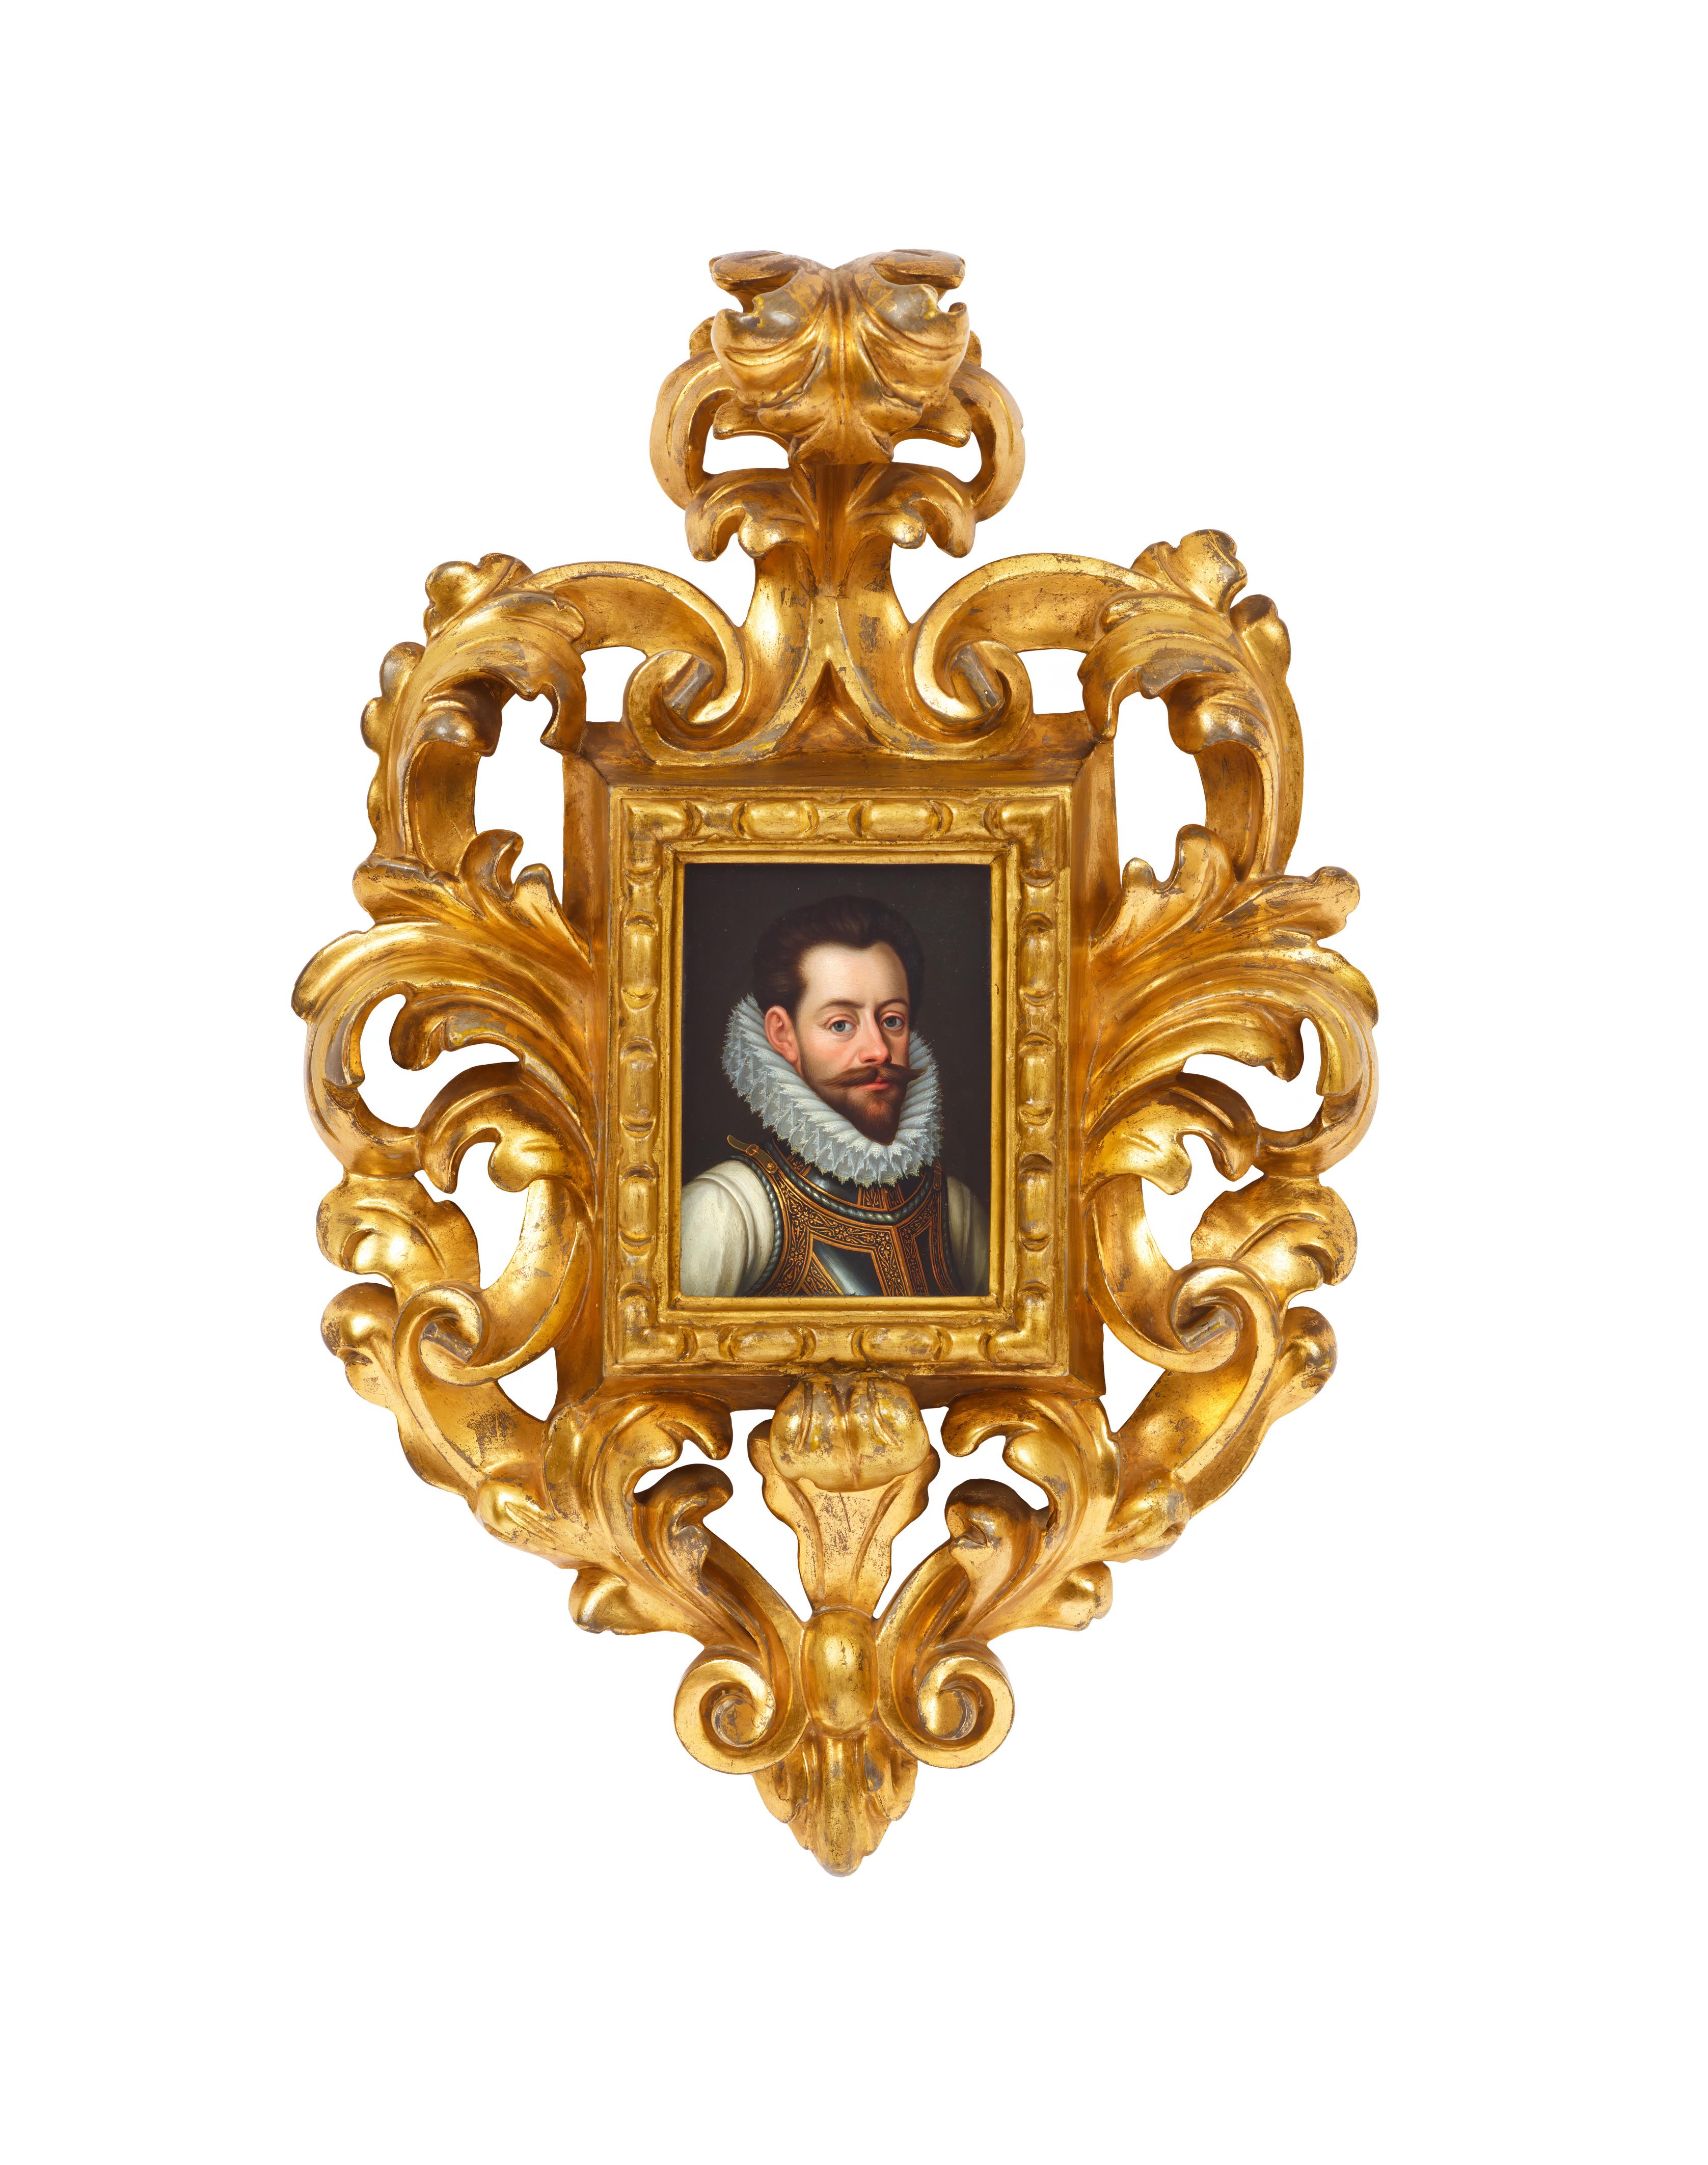 Jean de Saive - Portrait of Alessandro Farnese, Duke of Parma and Governor of the Spanish Netherlands - image-1